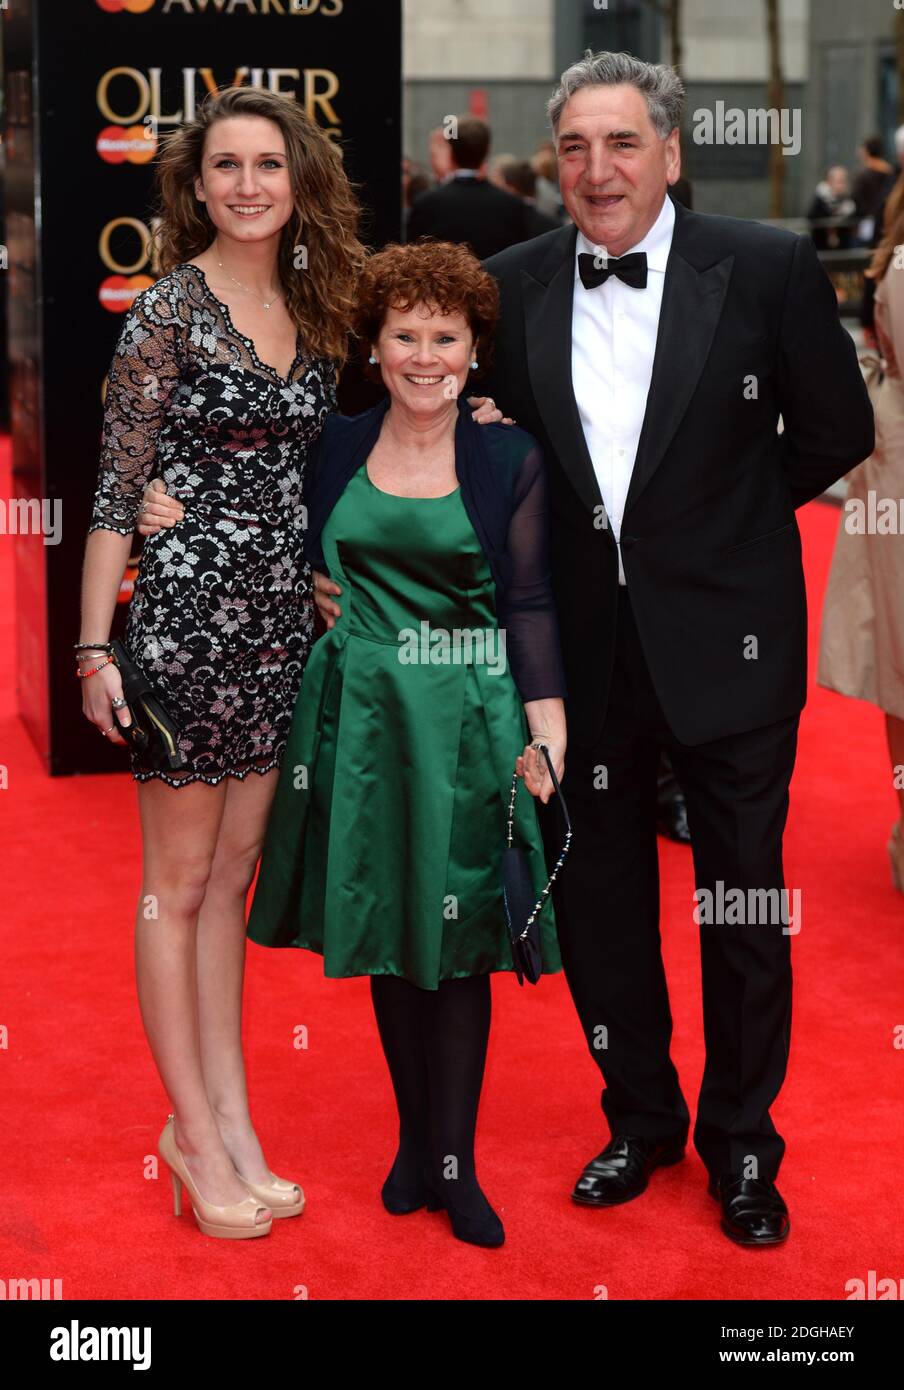 Imelda Staunton, Jim Carter and daughter arriving at the Olivier Awards 2013, Royal Opera House, Covent Garden, London. Stock Photo